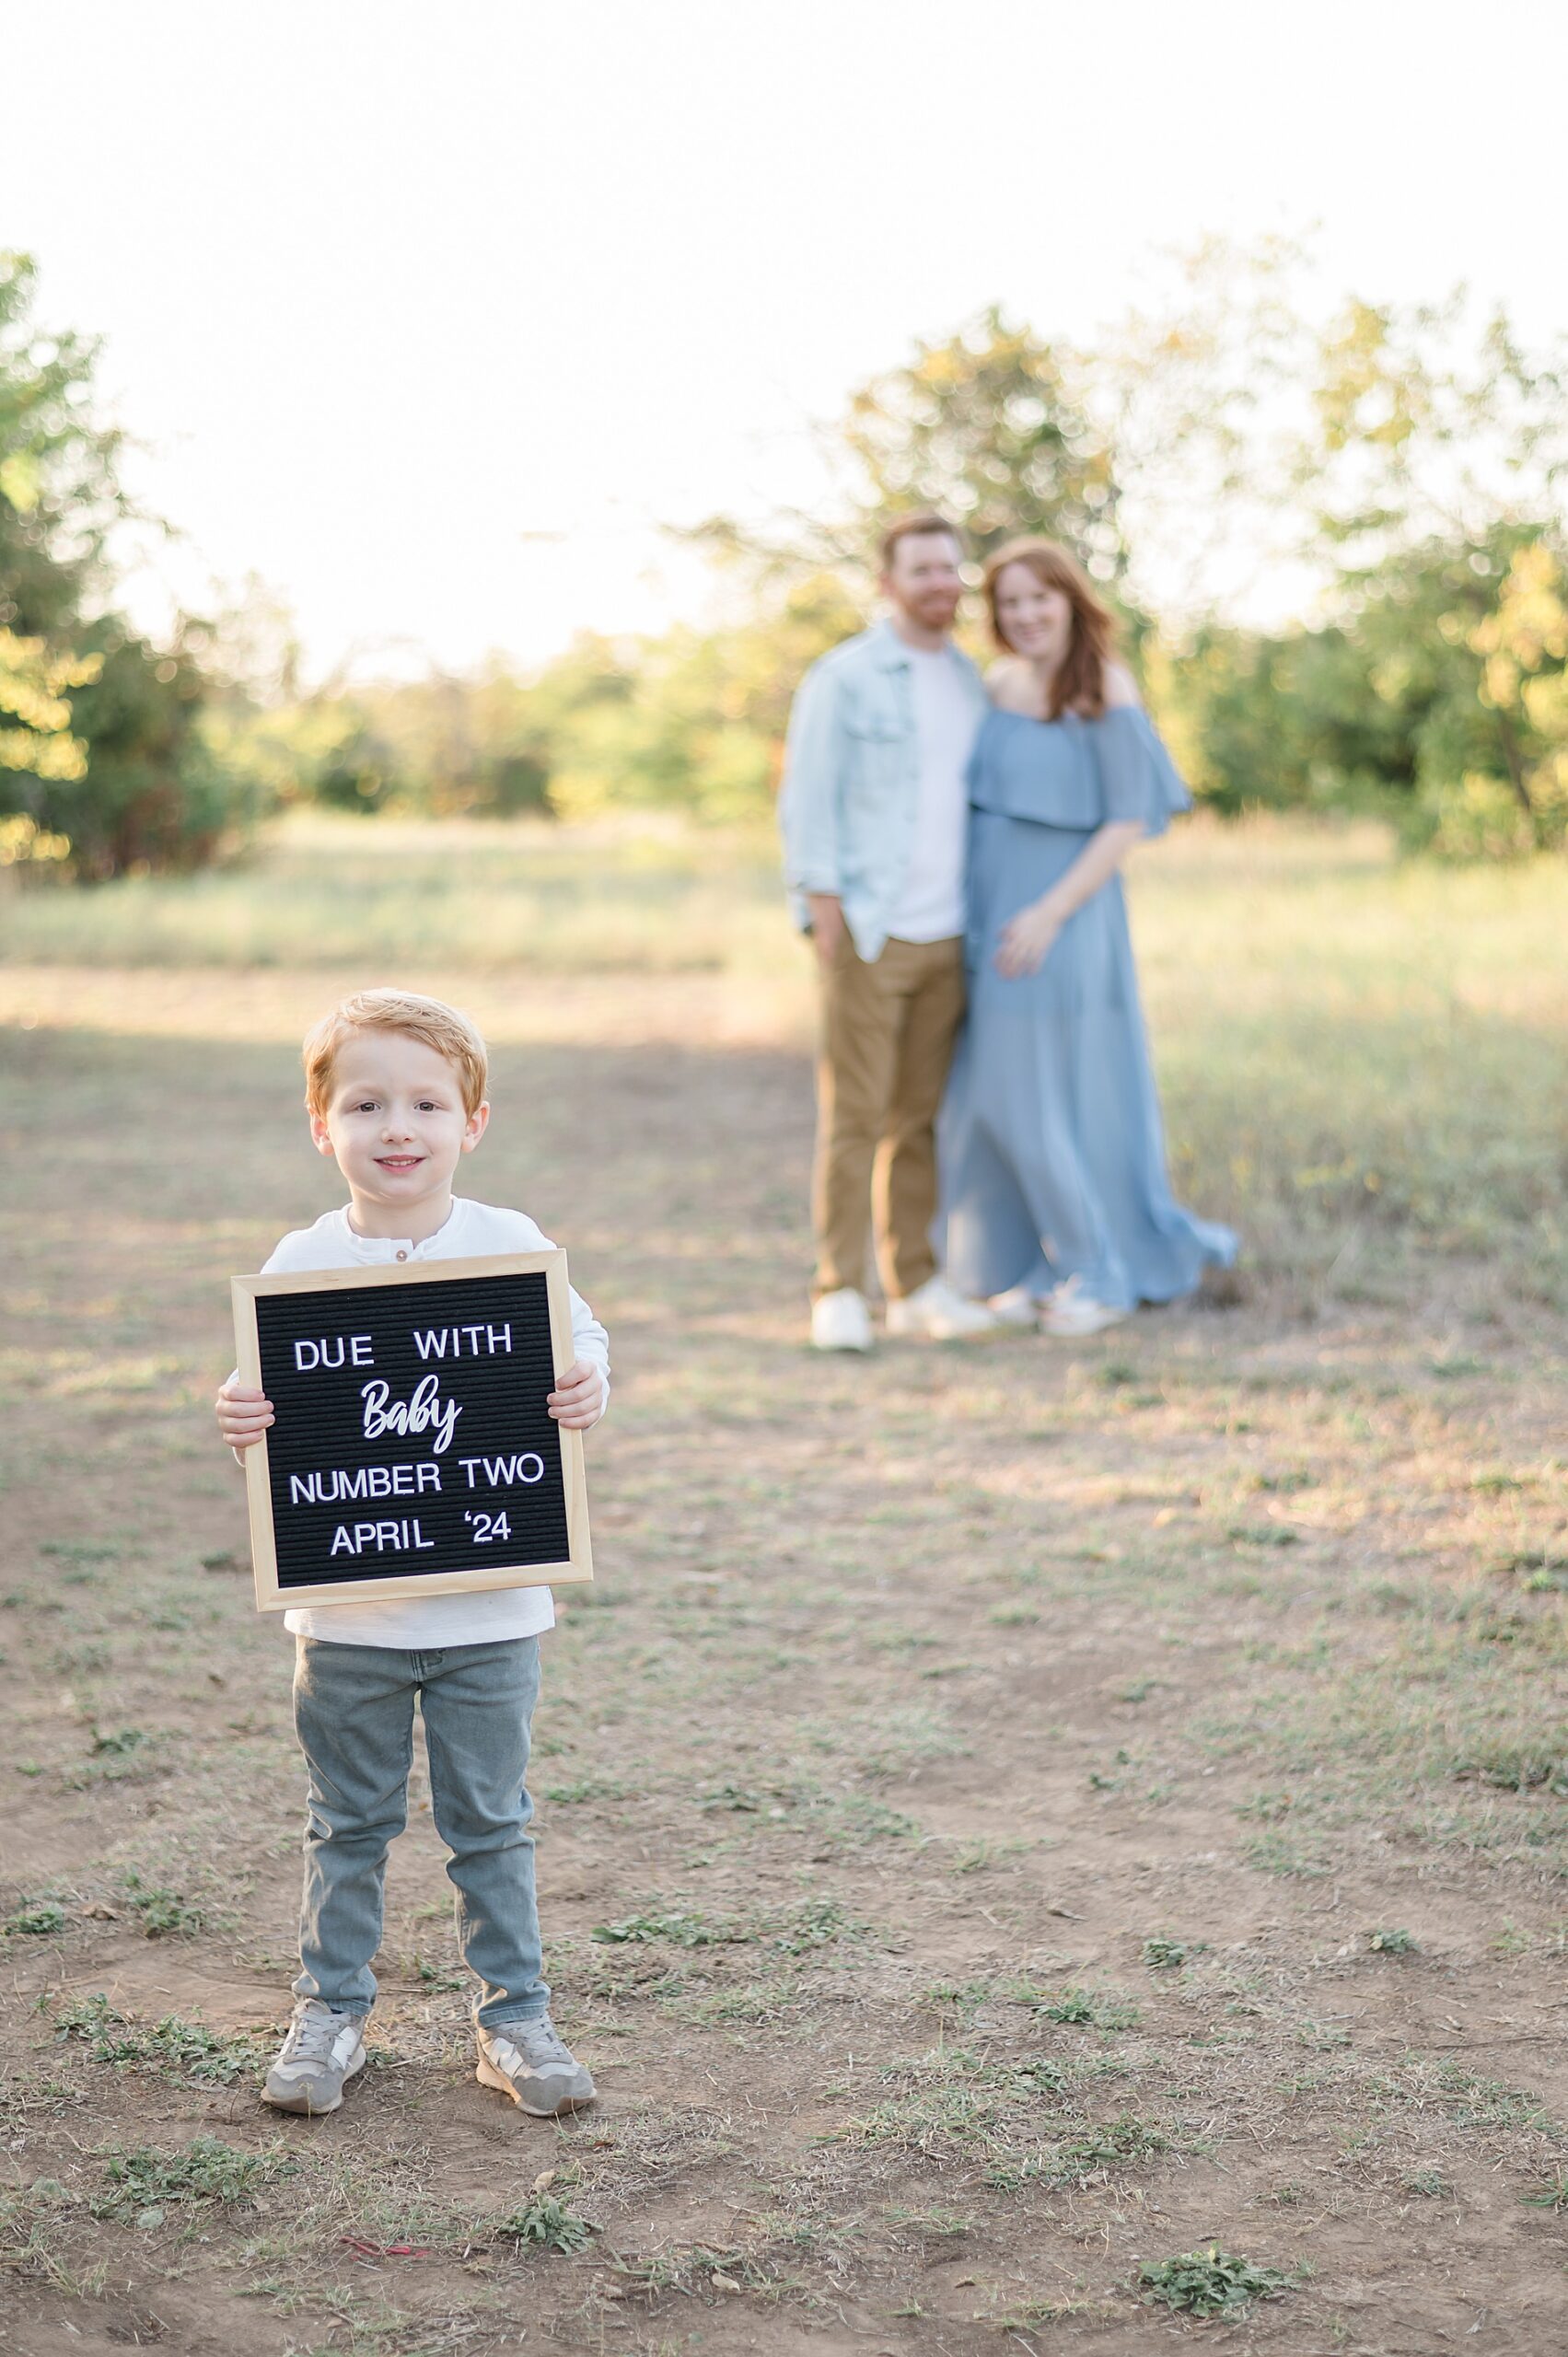 Frisco commons is one of the Top 11 Dallas-Fort Worth Picture Locations photographed by Lindsey Dutton Photography, a Dallas Family photographer
